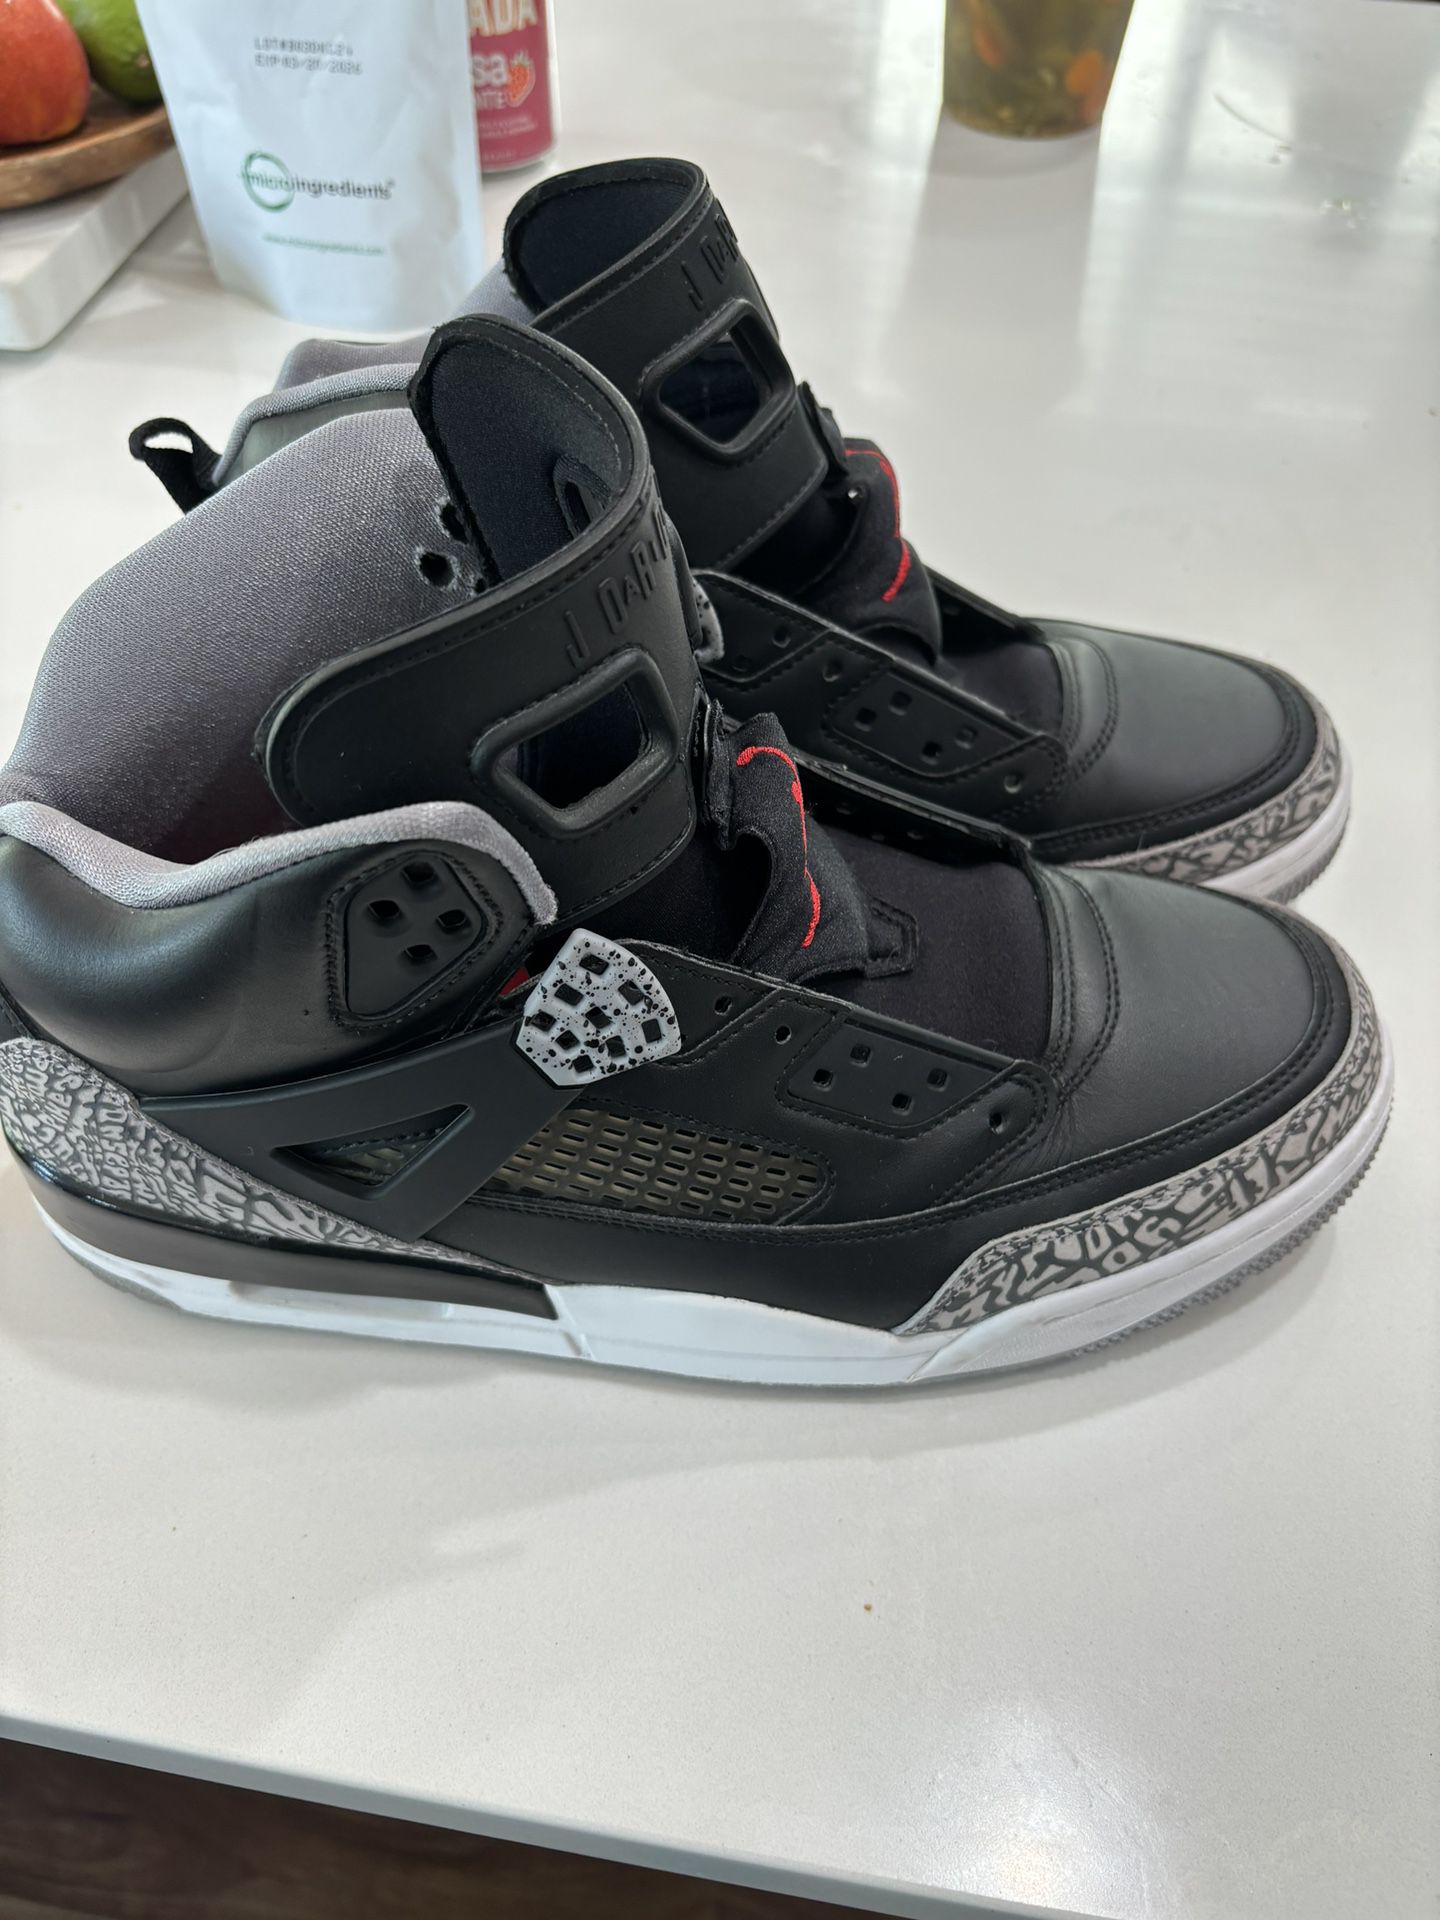 Jordan Spizike Black Cement And White Cement Size 11 BOTH for $140